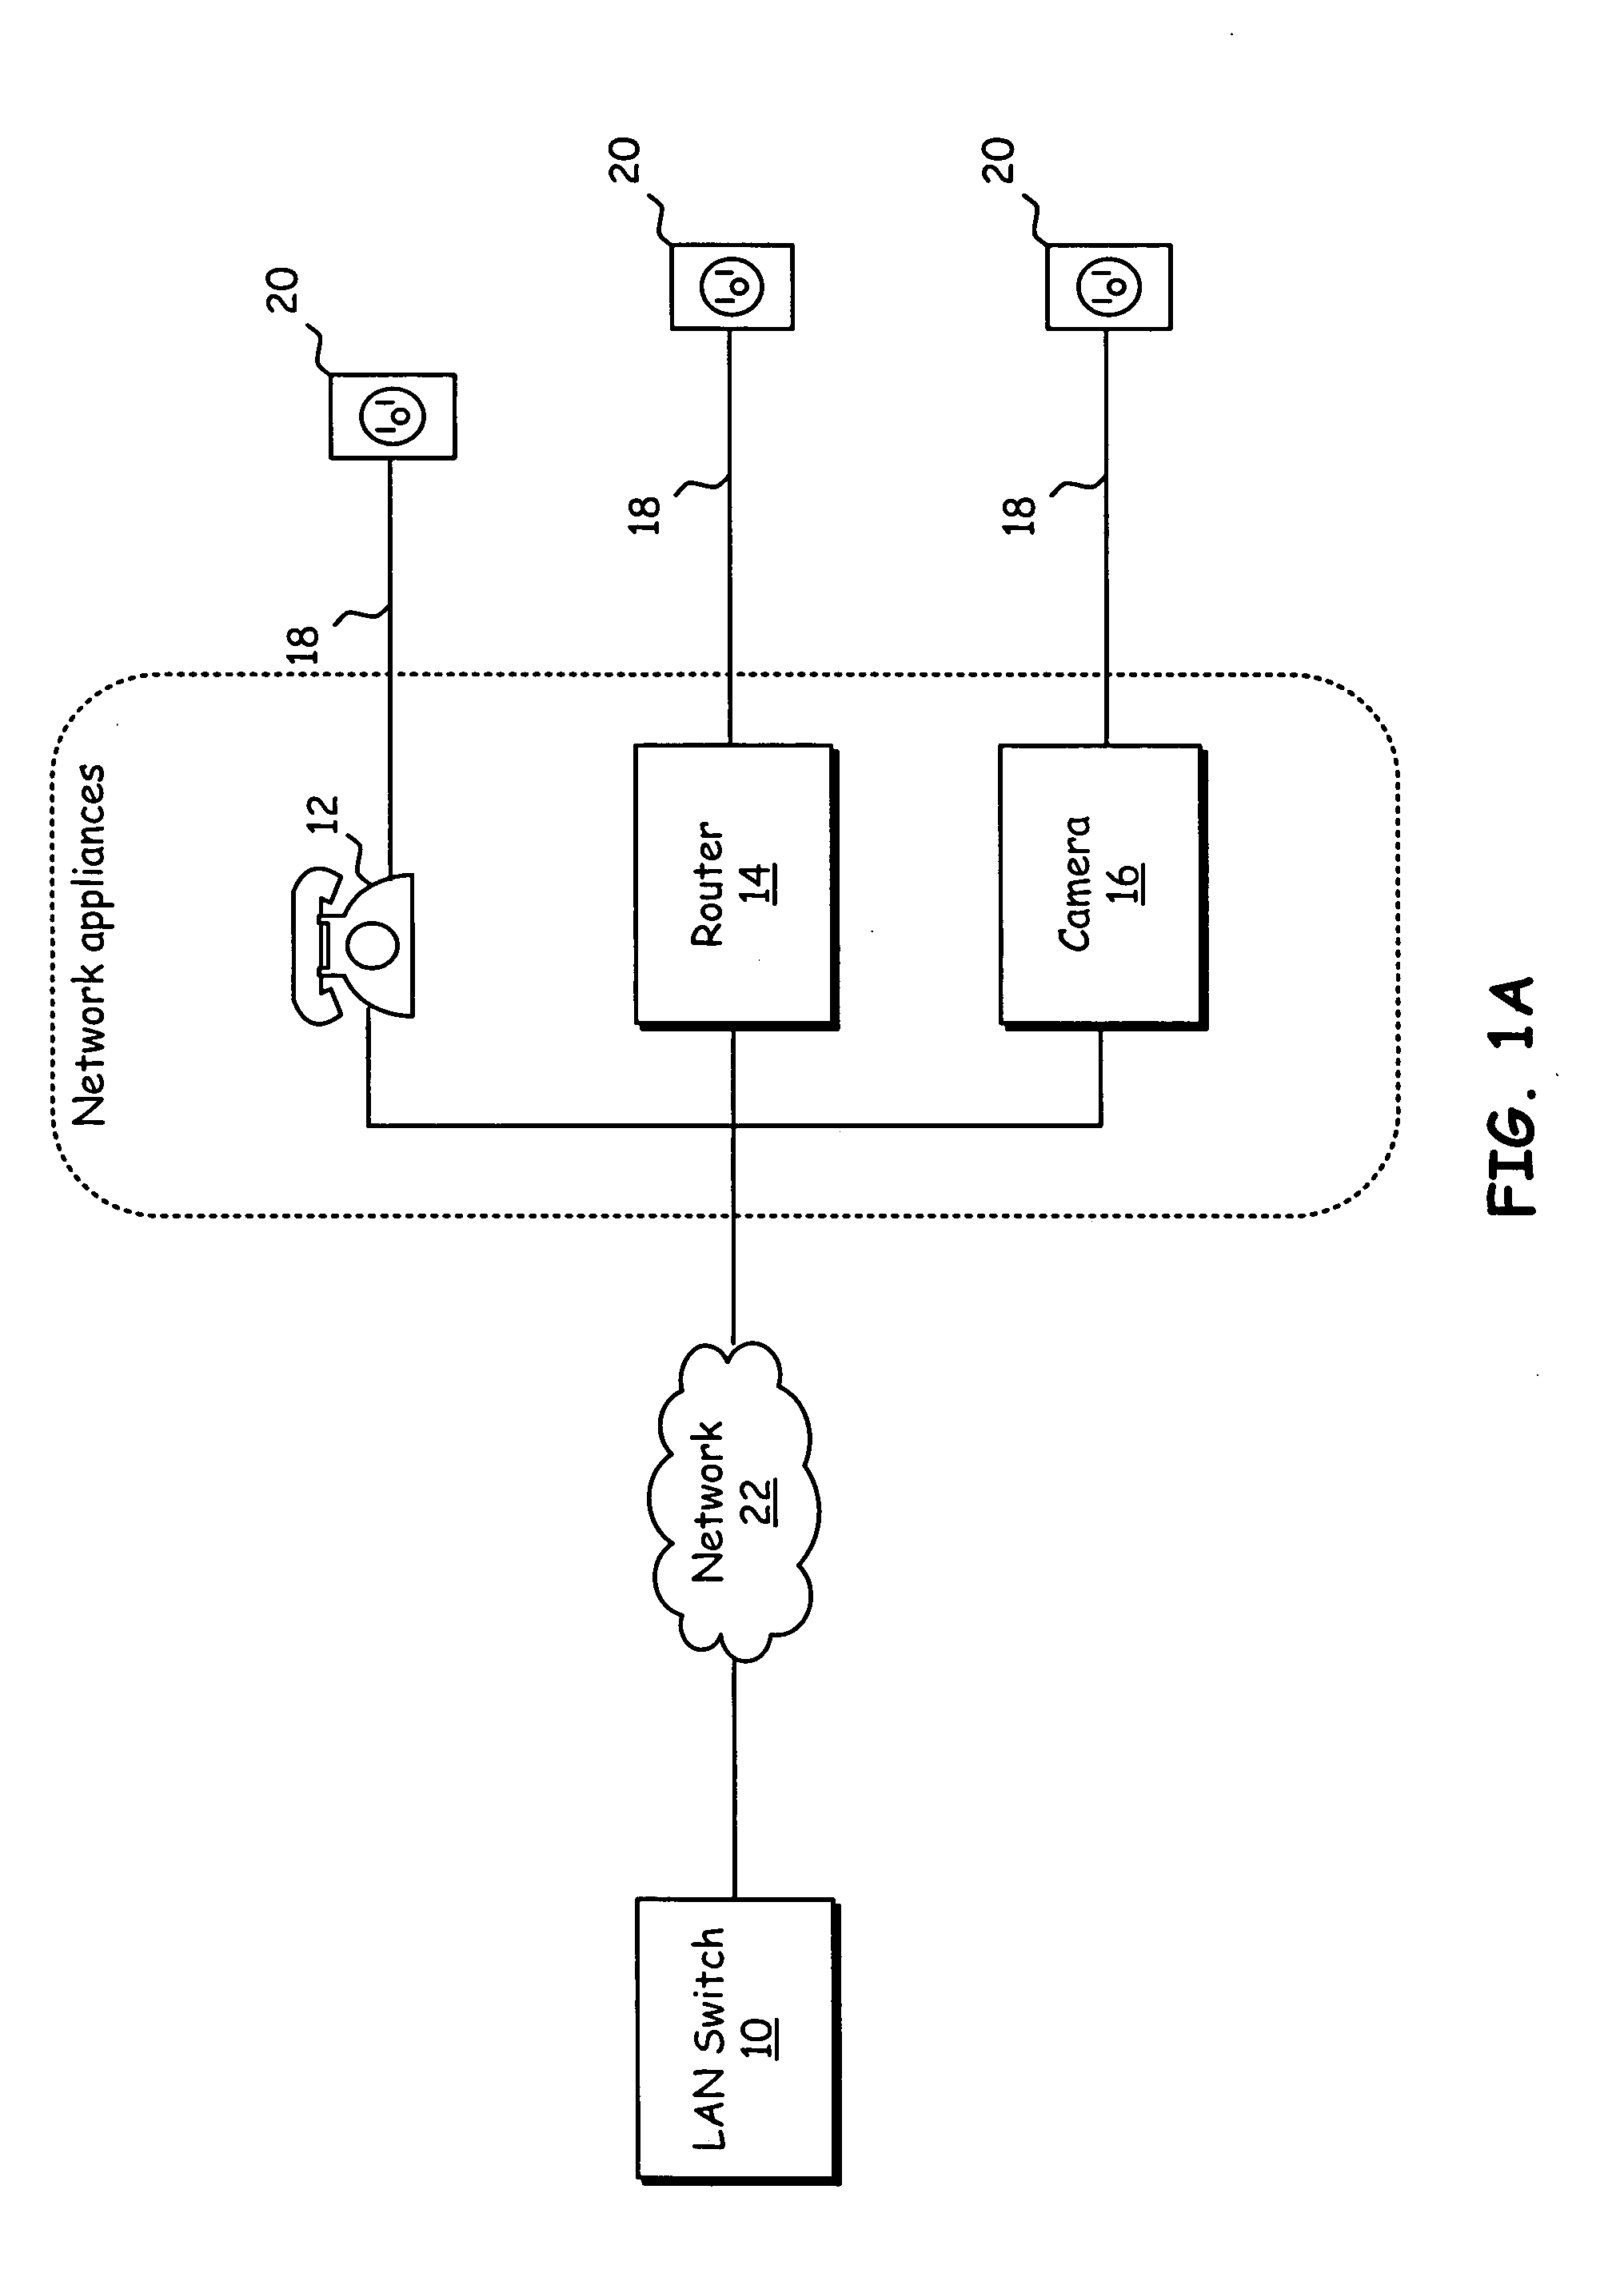 Method for high voltage power feed on differential cable pairs